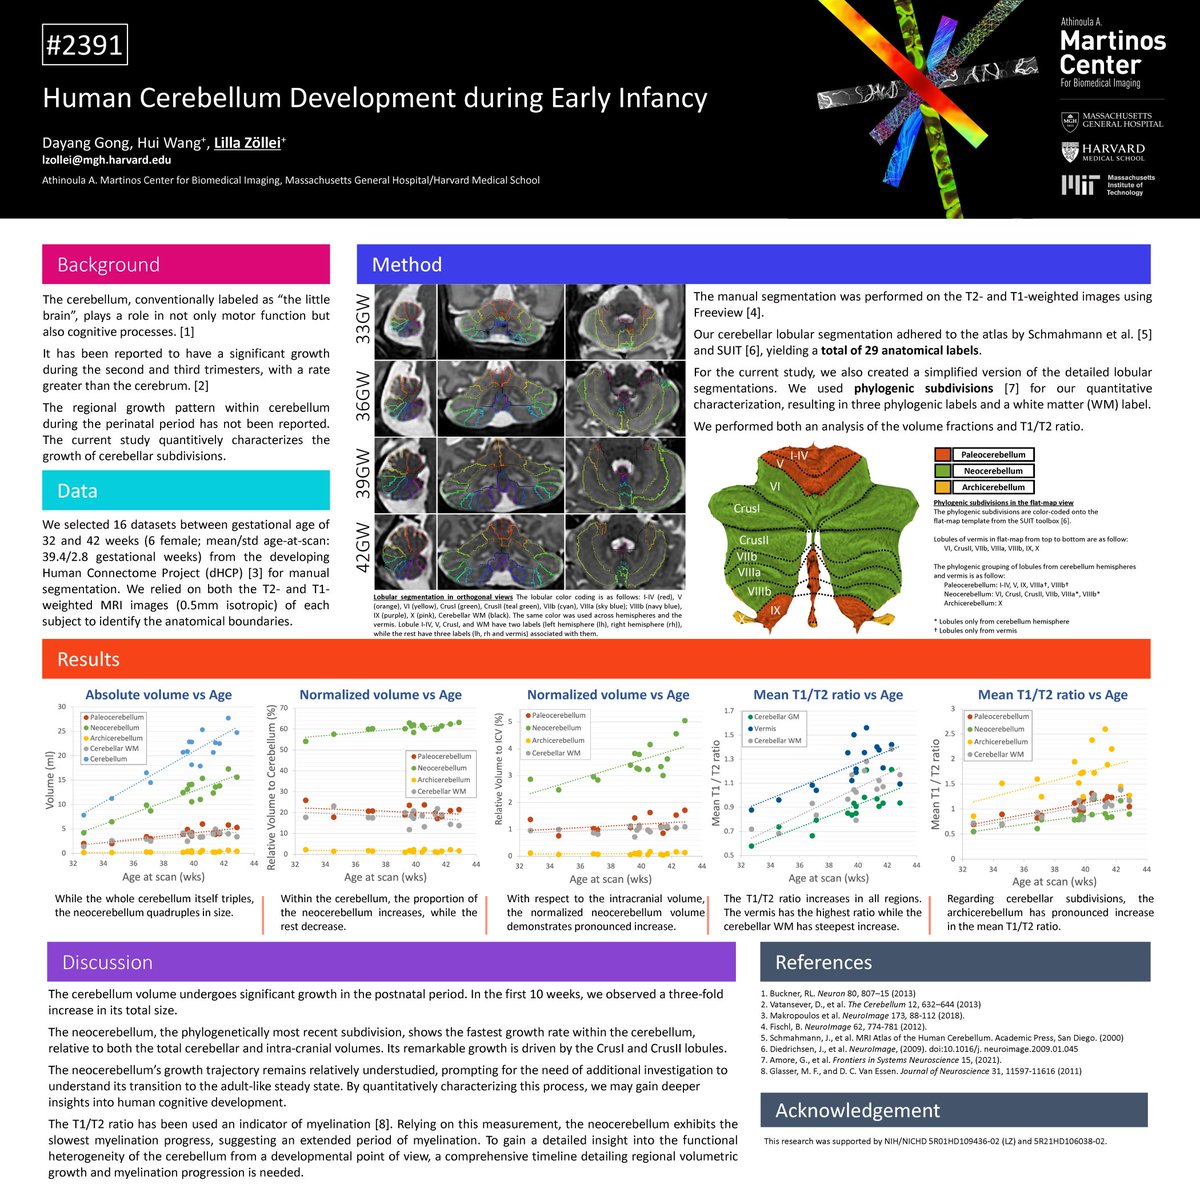 Another day, another poster. :) Come see #2391 at #OHBM2023 about cerebellum development. Work with Hui Wang and Dayang Gong. @FreeSurferMRI